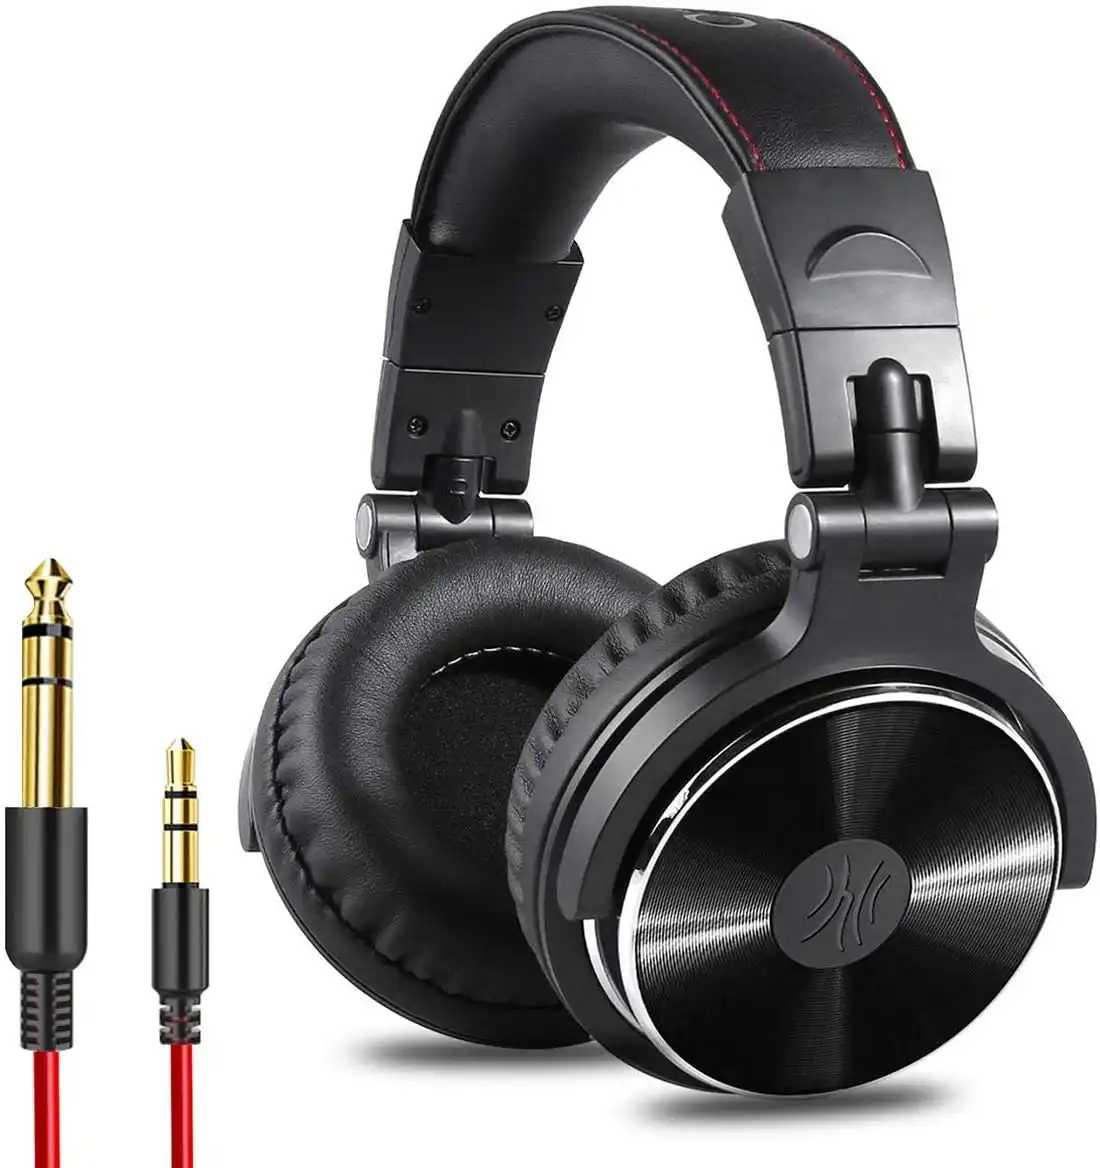 OneOdio PRO-10 Adapter-Free Closed Back Over Ear DJ Stereo Monitor Headphones, Professional Studio Monitor & Mixing, Telescopic Arms with Scale, Newes